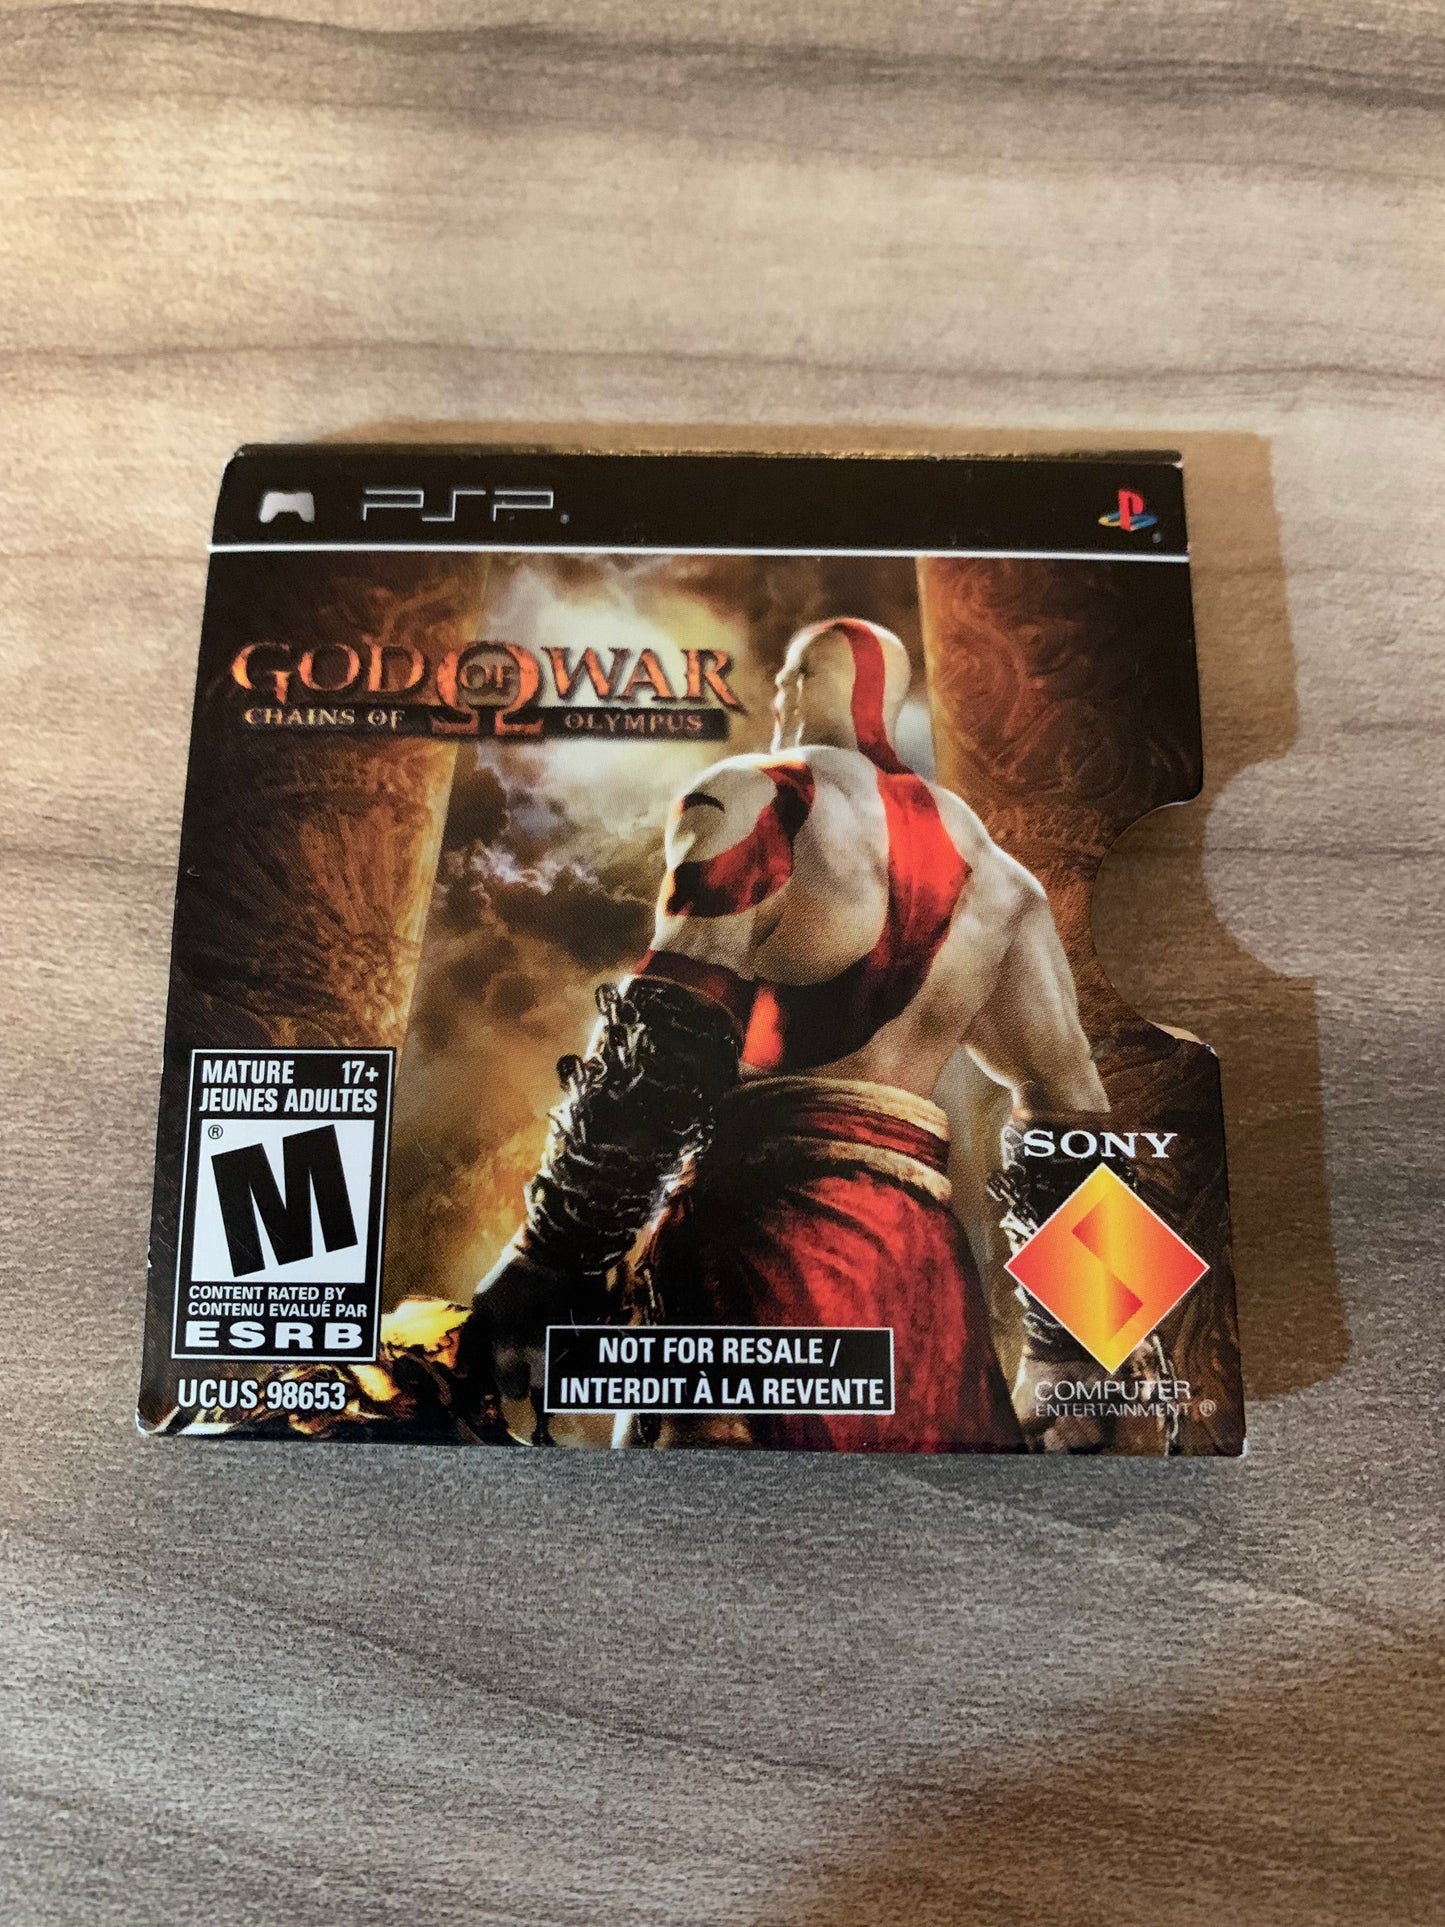 SONY PLAYSTATiON PORTABLE [PSP] | GOD OF WAR CHAiNS OF OLYMPUS | NOT FOR RESALE